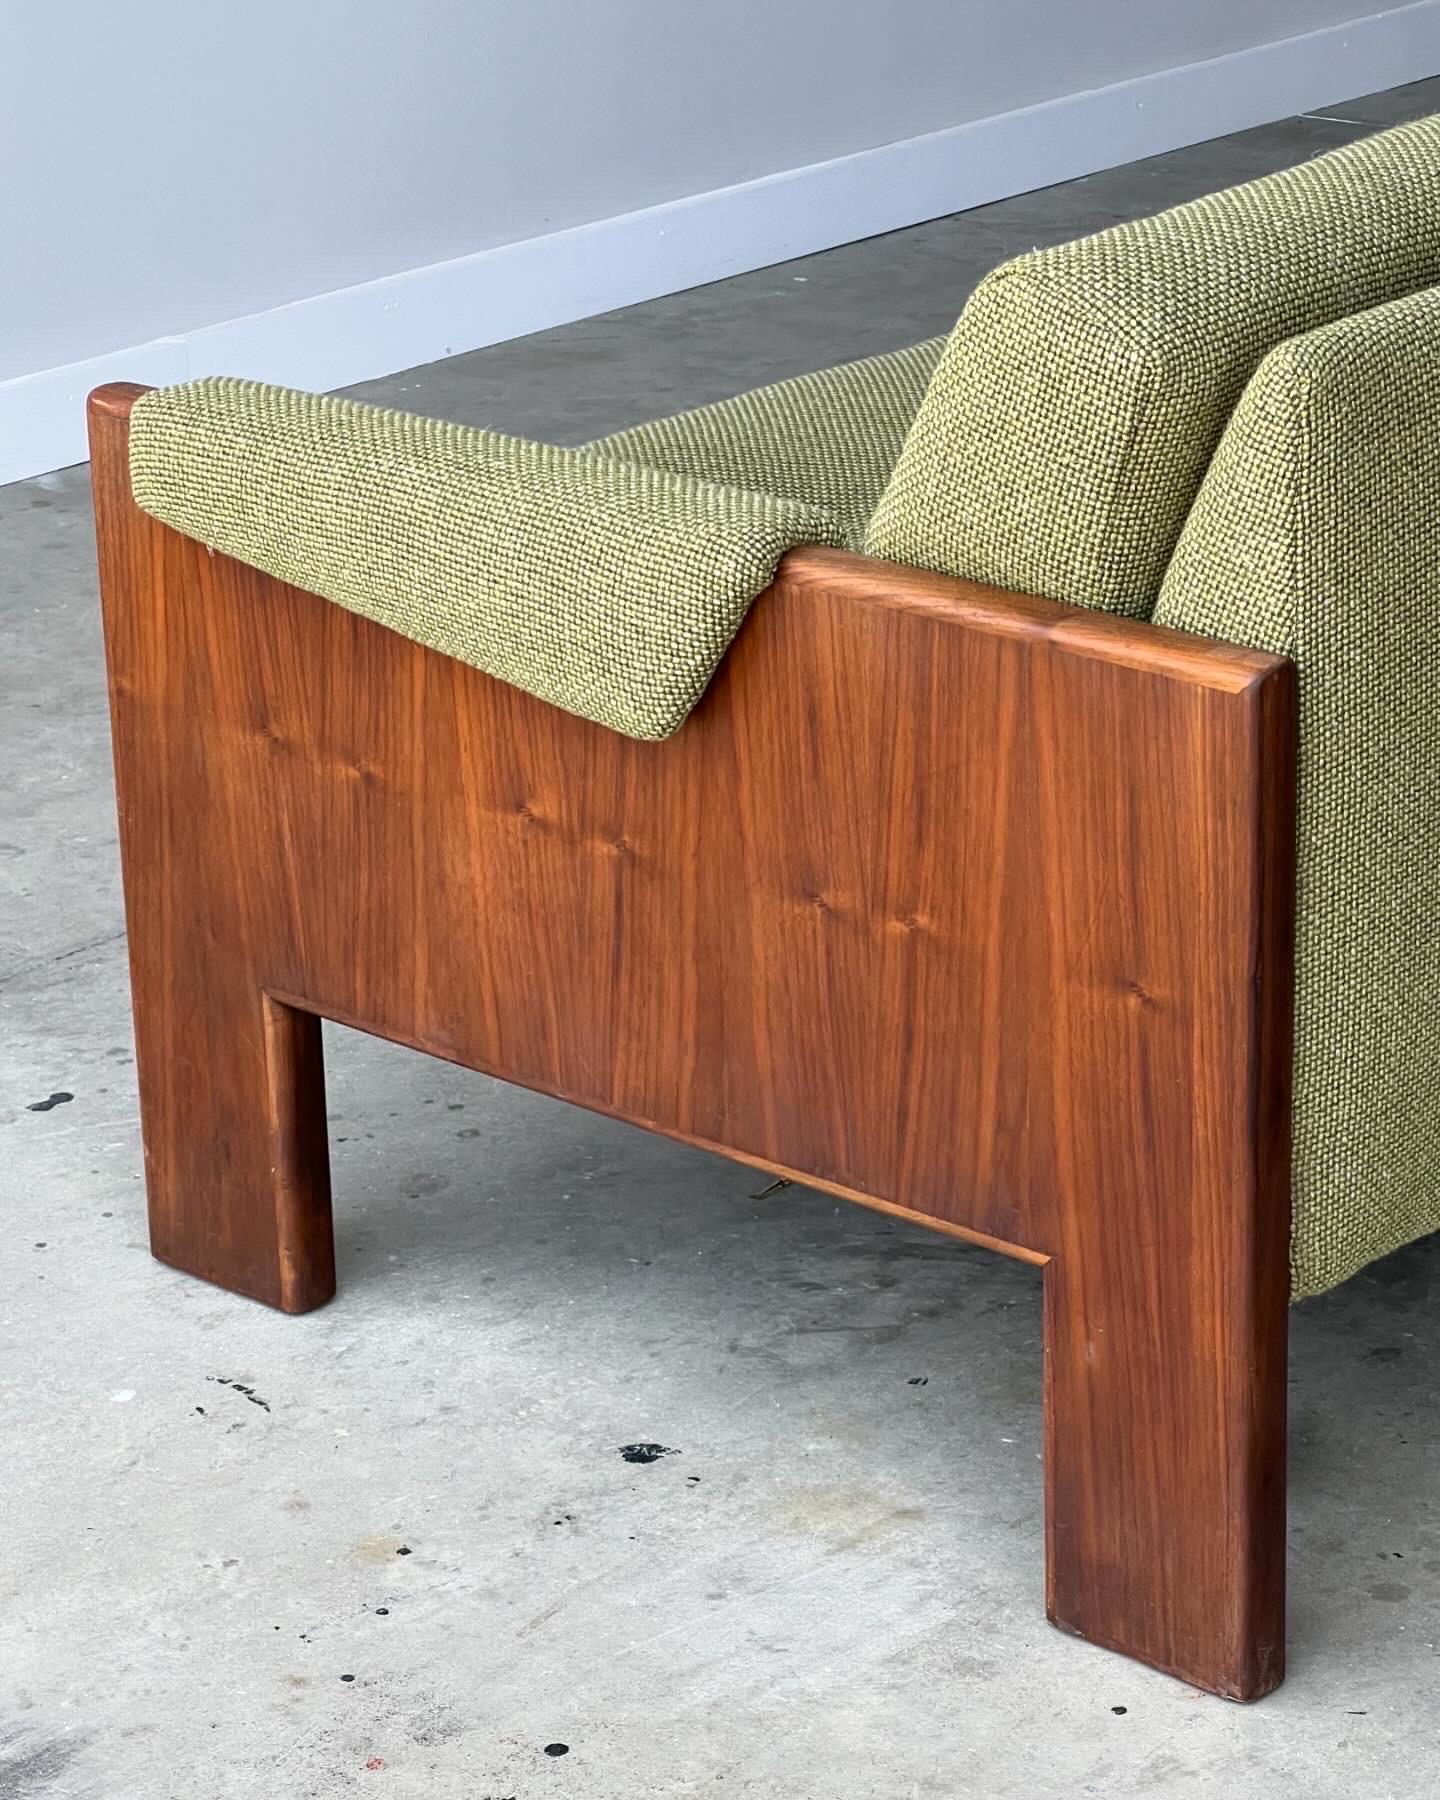 Mid-century walnut case sofa newly upholstered in a thick green knit fabric that’s very durable and vibrant. Padded arm inserts and angled back cushions gives it a very stylish and dynamic look similar to Milo Baughman or Italian design of the